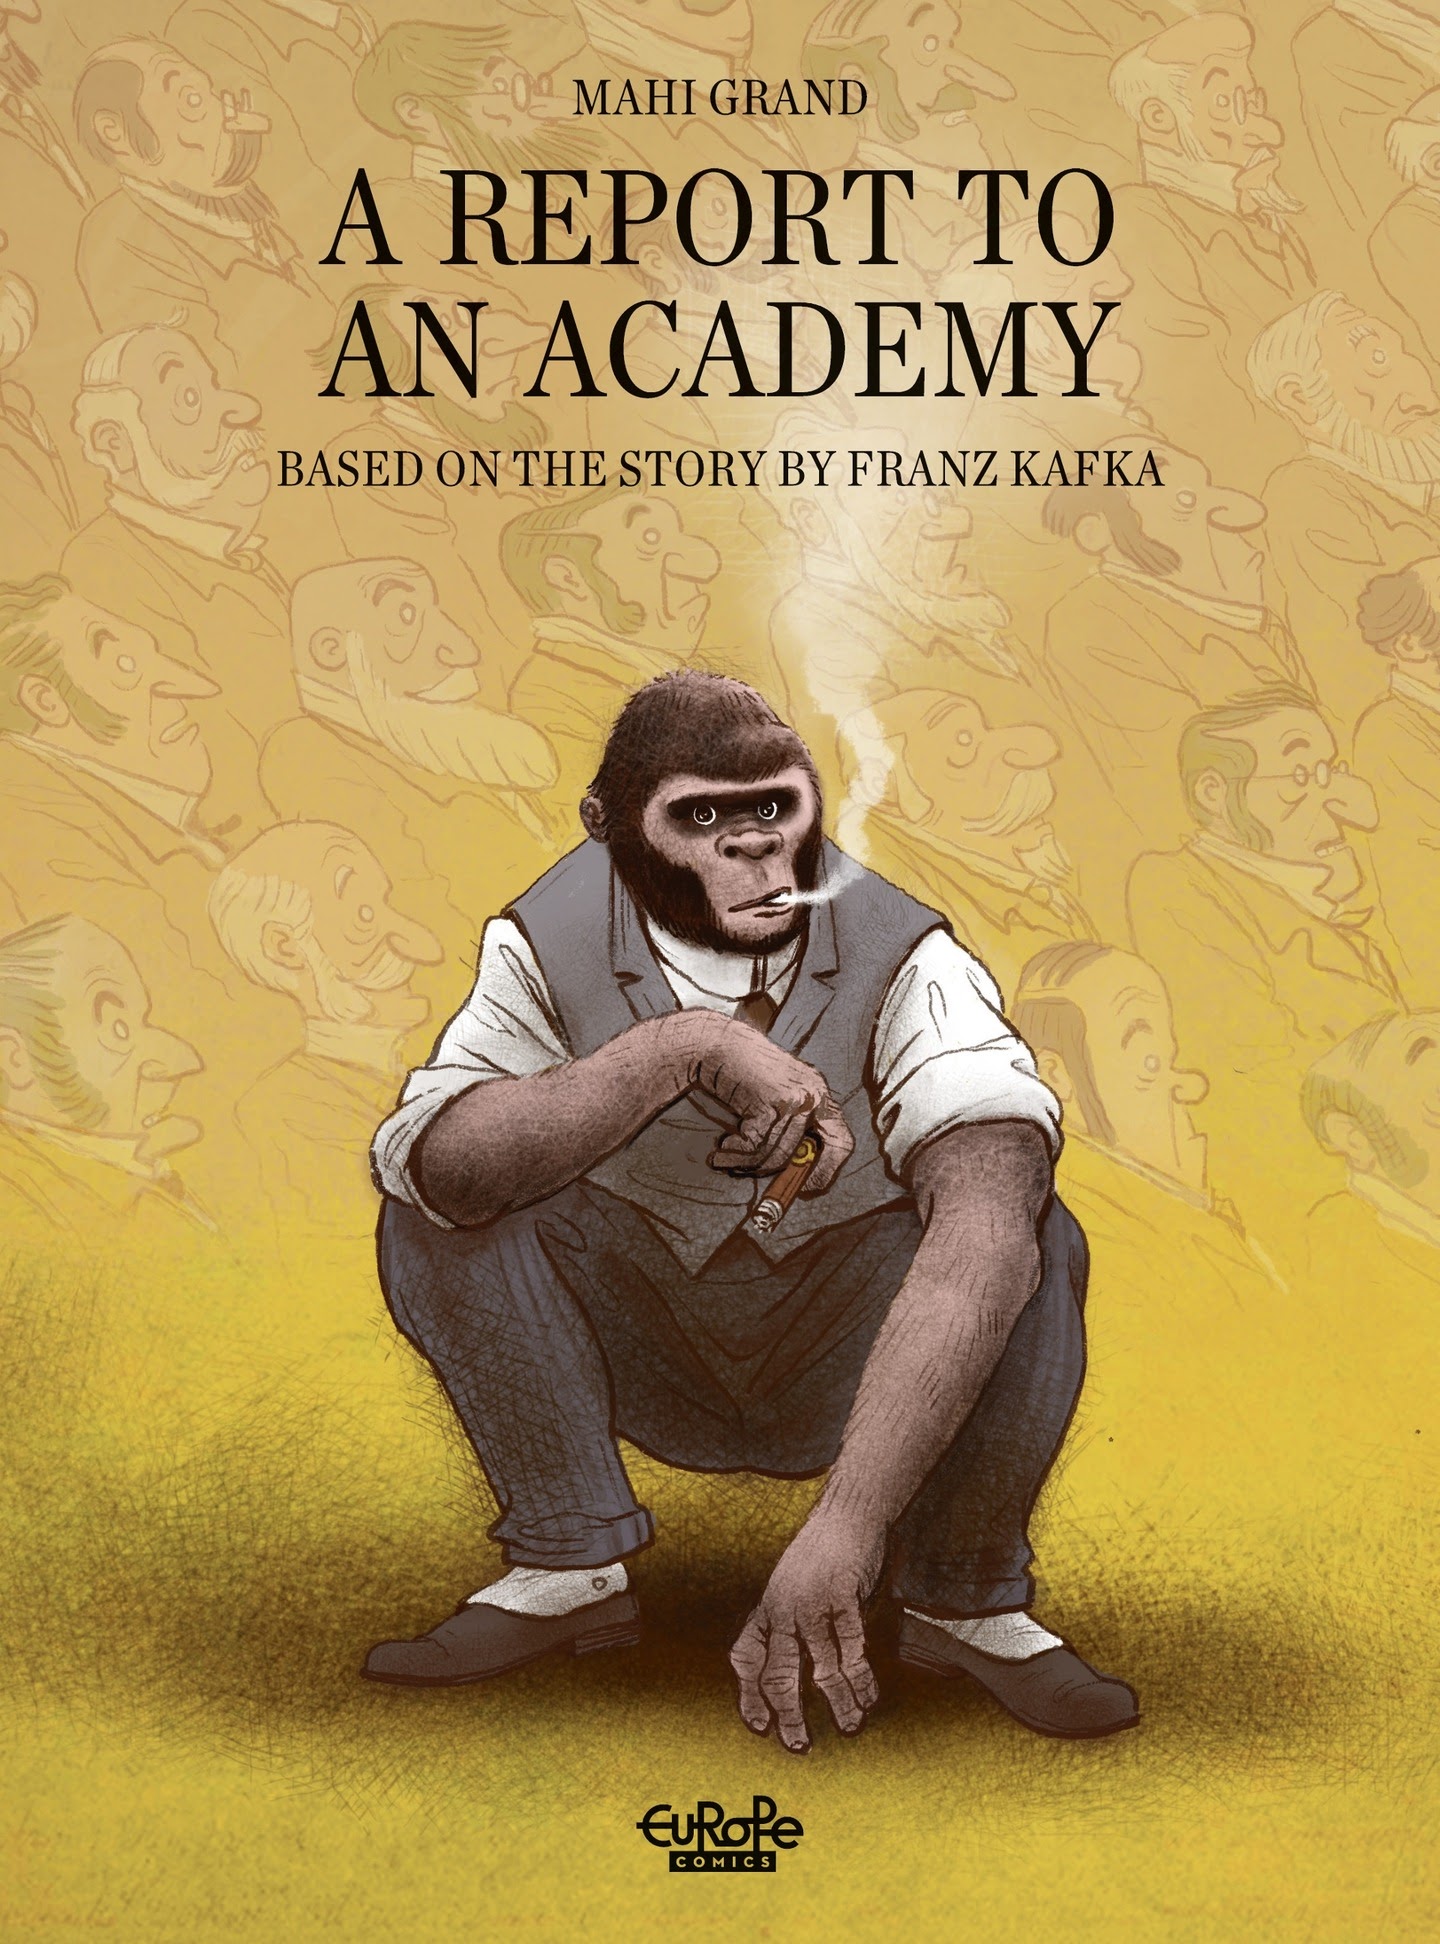 Read online A Report to an Academy comic -  Issue # TPB - 1